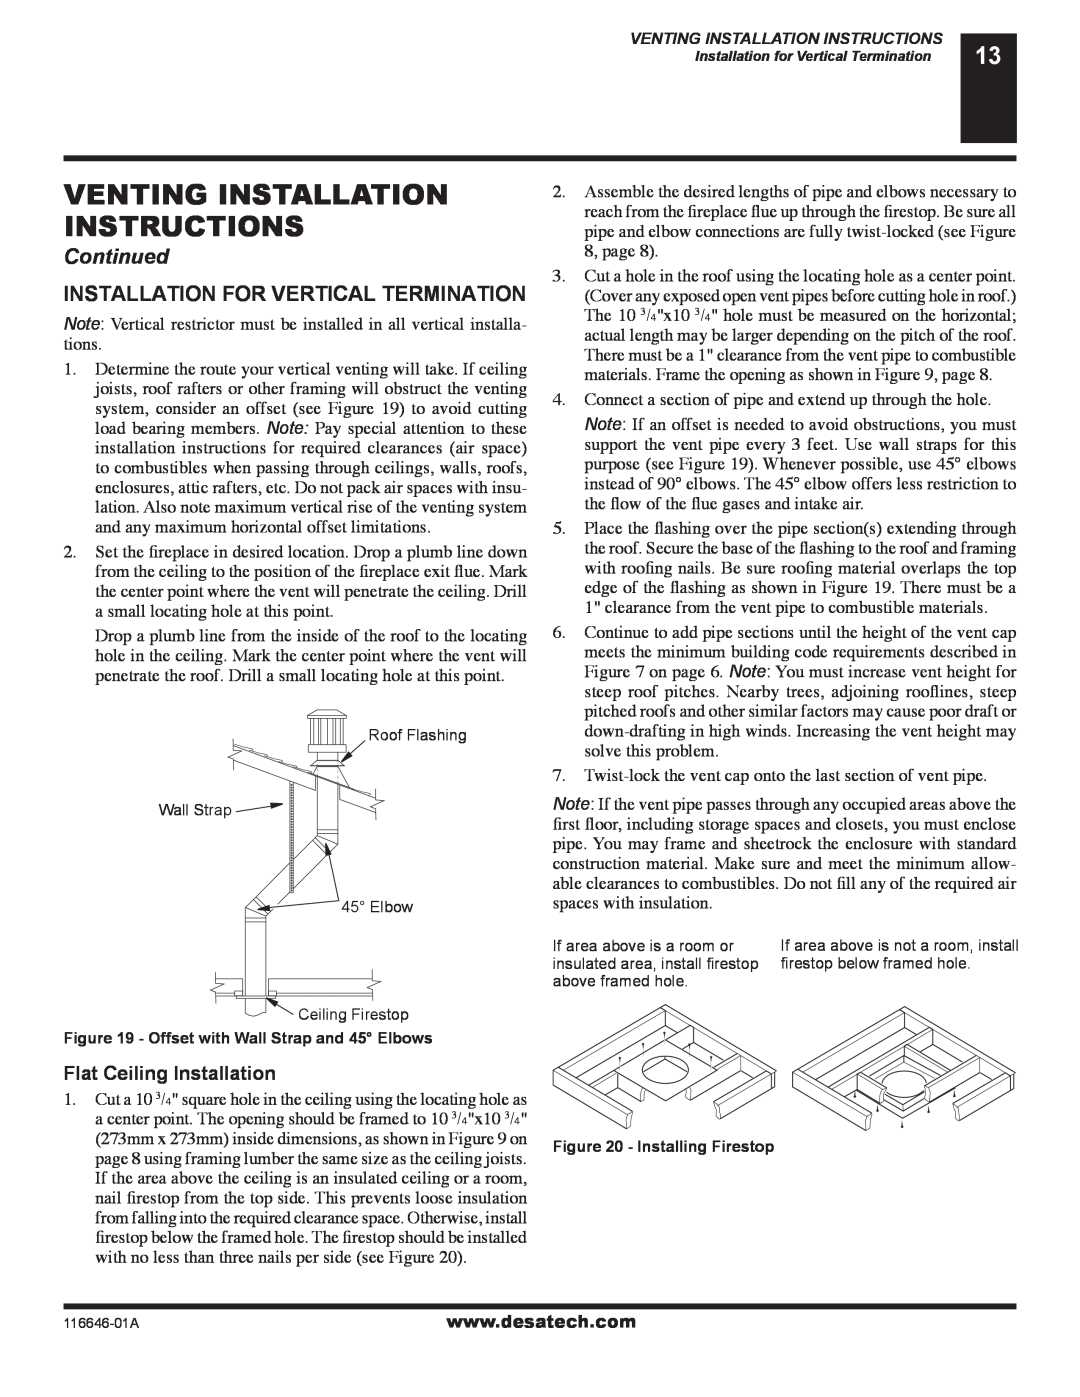 Desa (V)T32P-A Series, CGDV32NR Venting Installation Instructions, Continued, Installation For Vertical Termination 